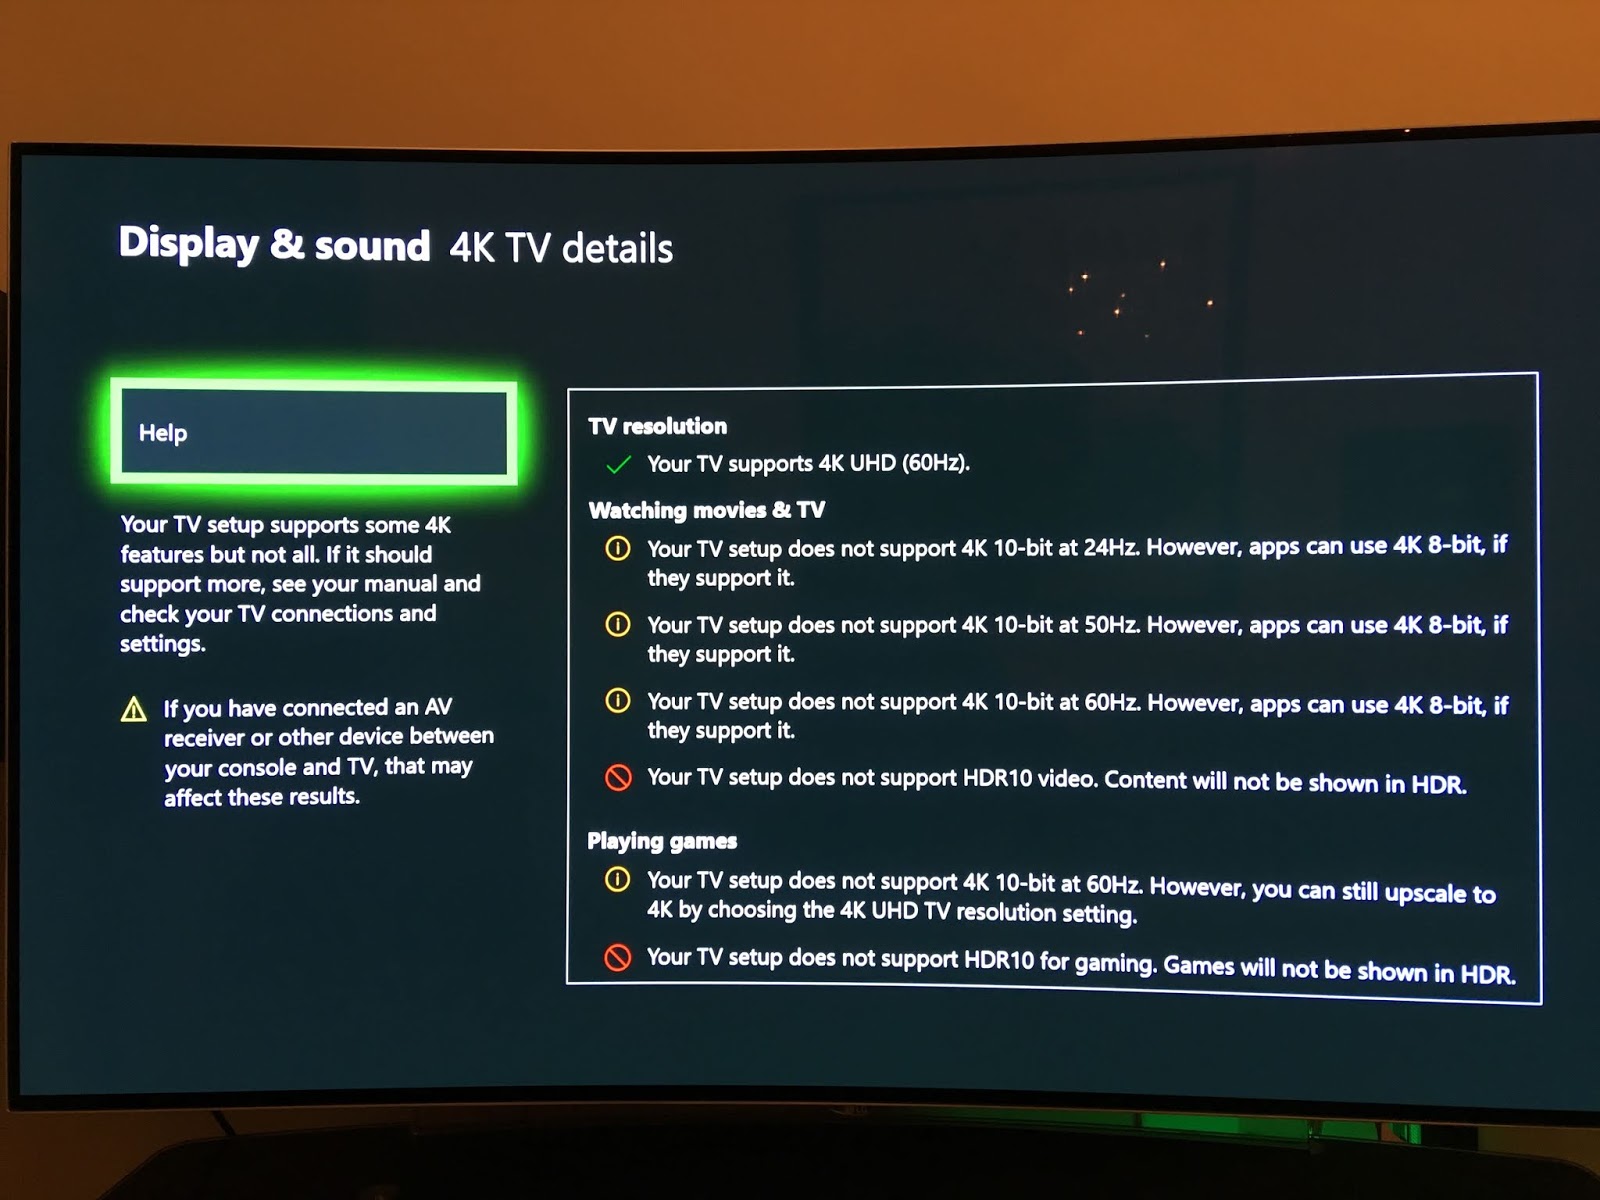 Voorkomen benzine Armoedig How to Fix the Video's Quality Issues on Xbox One? - Evelyn Georgia